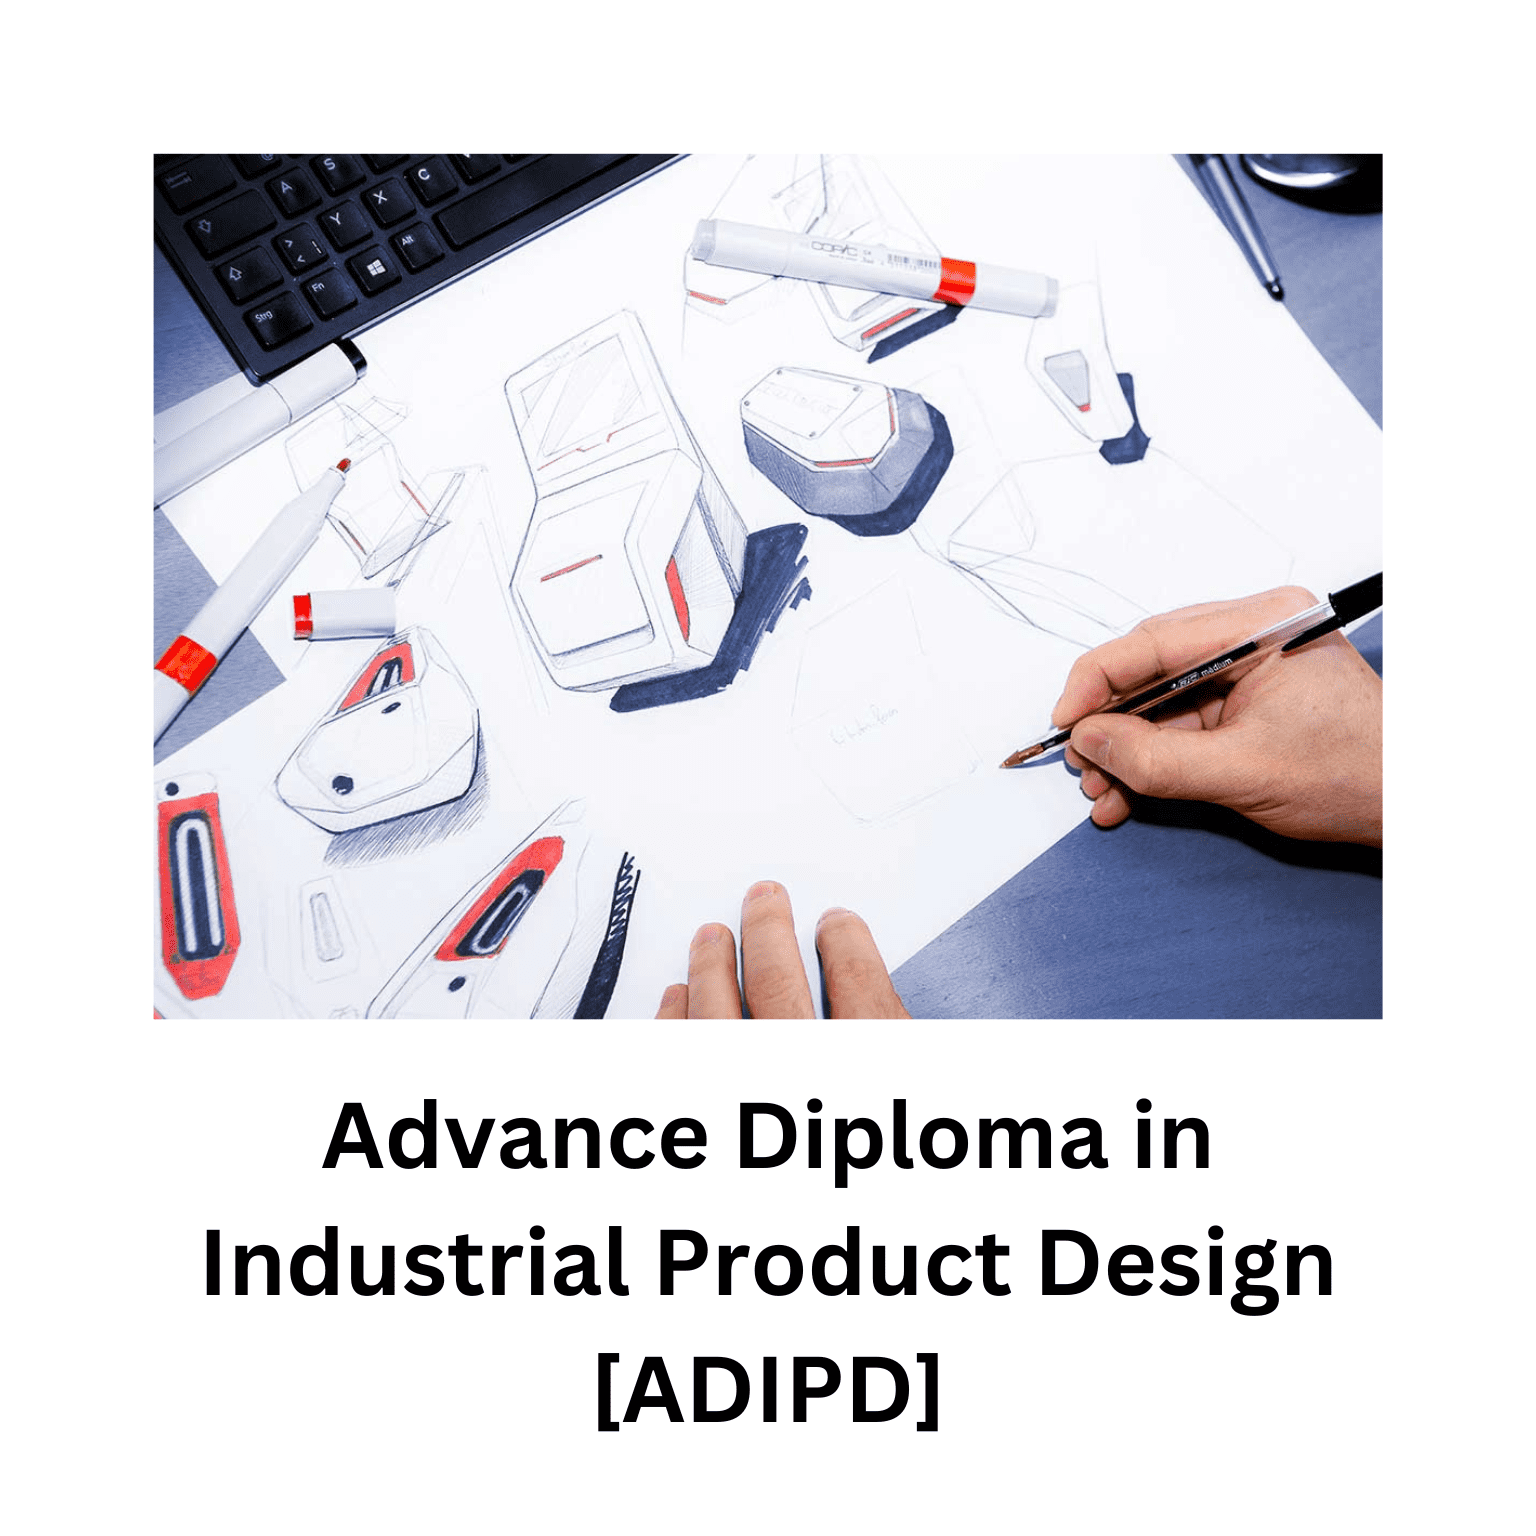 Advance Diploma in Industrial Product Design, [ADIPD]